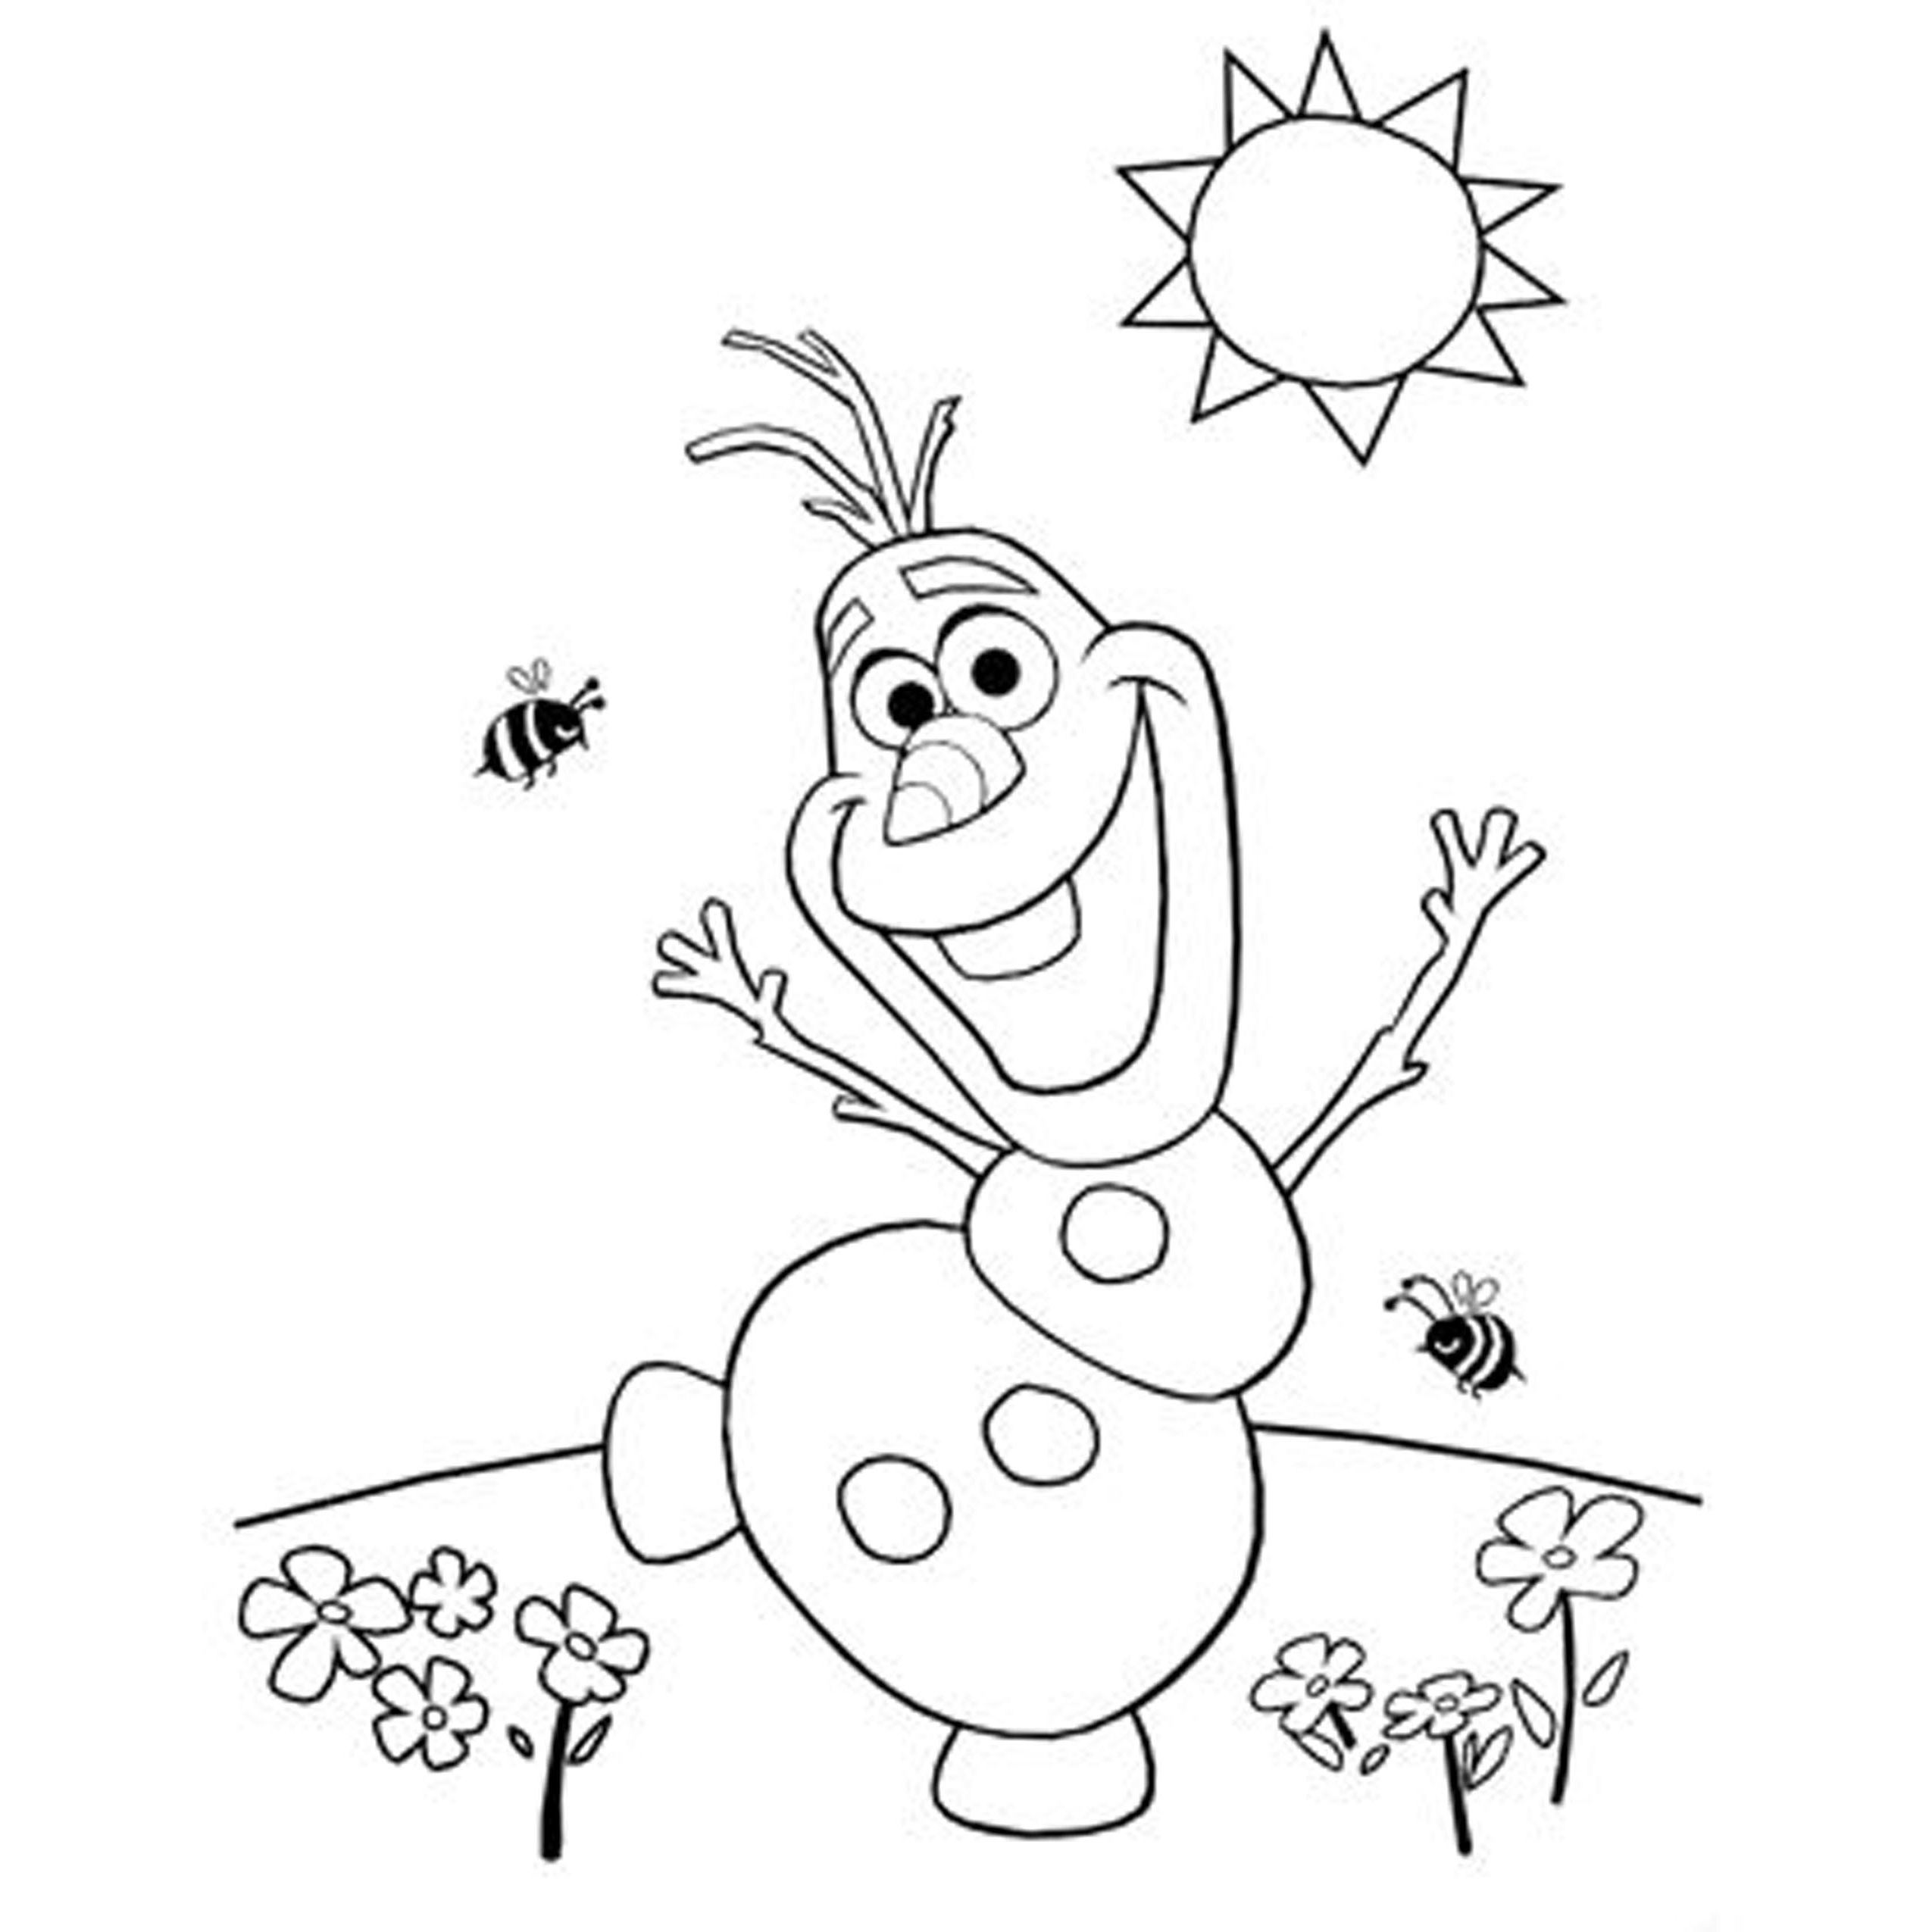 Frozen 2 Coloring Pages at GetDrawings Free download